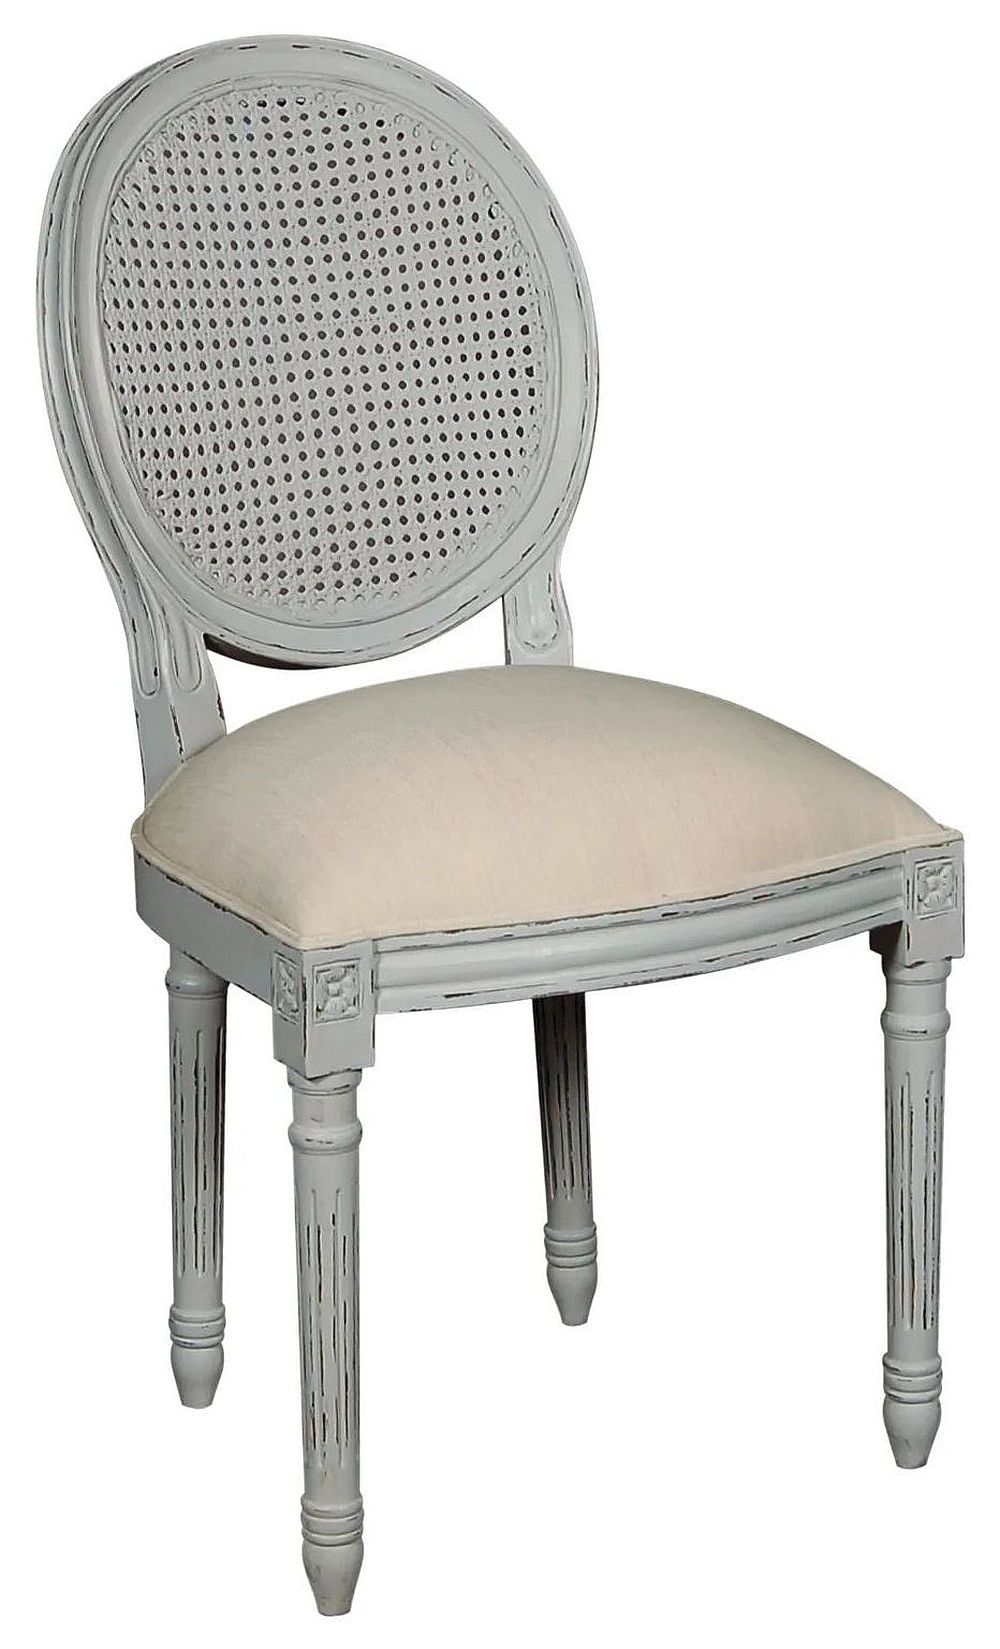 Valerie French Distressed Stone Grey Lattice Back Dining Chair Sold In Pairs